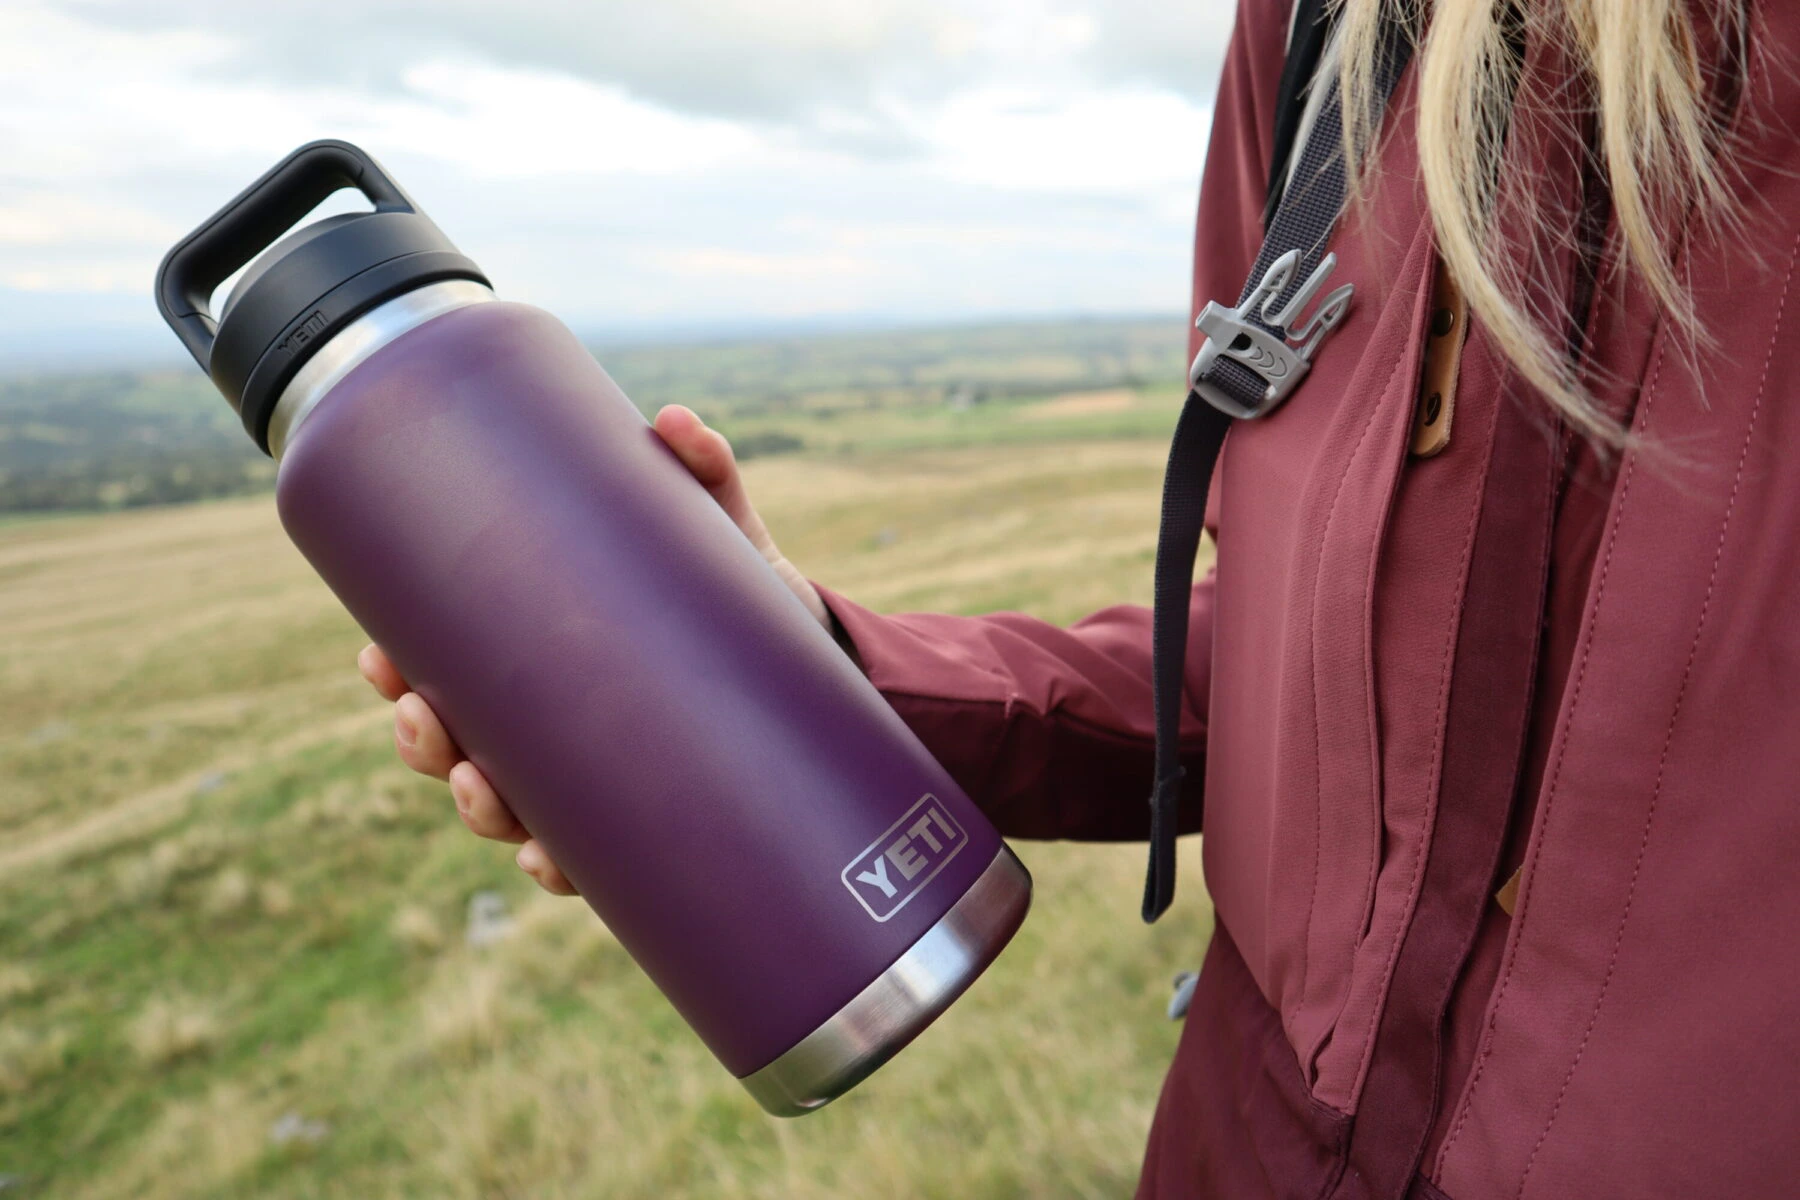 Stanley just released the best insulated water bottle ever